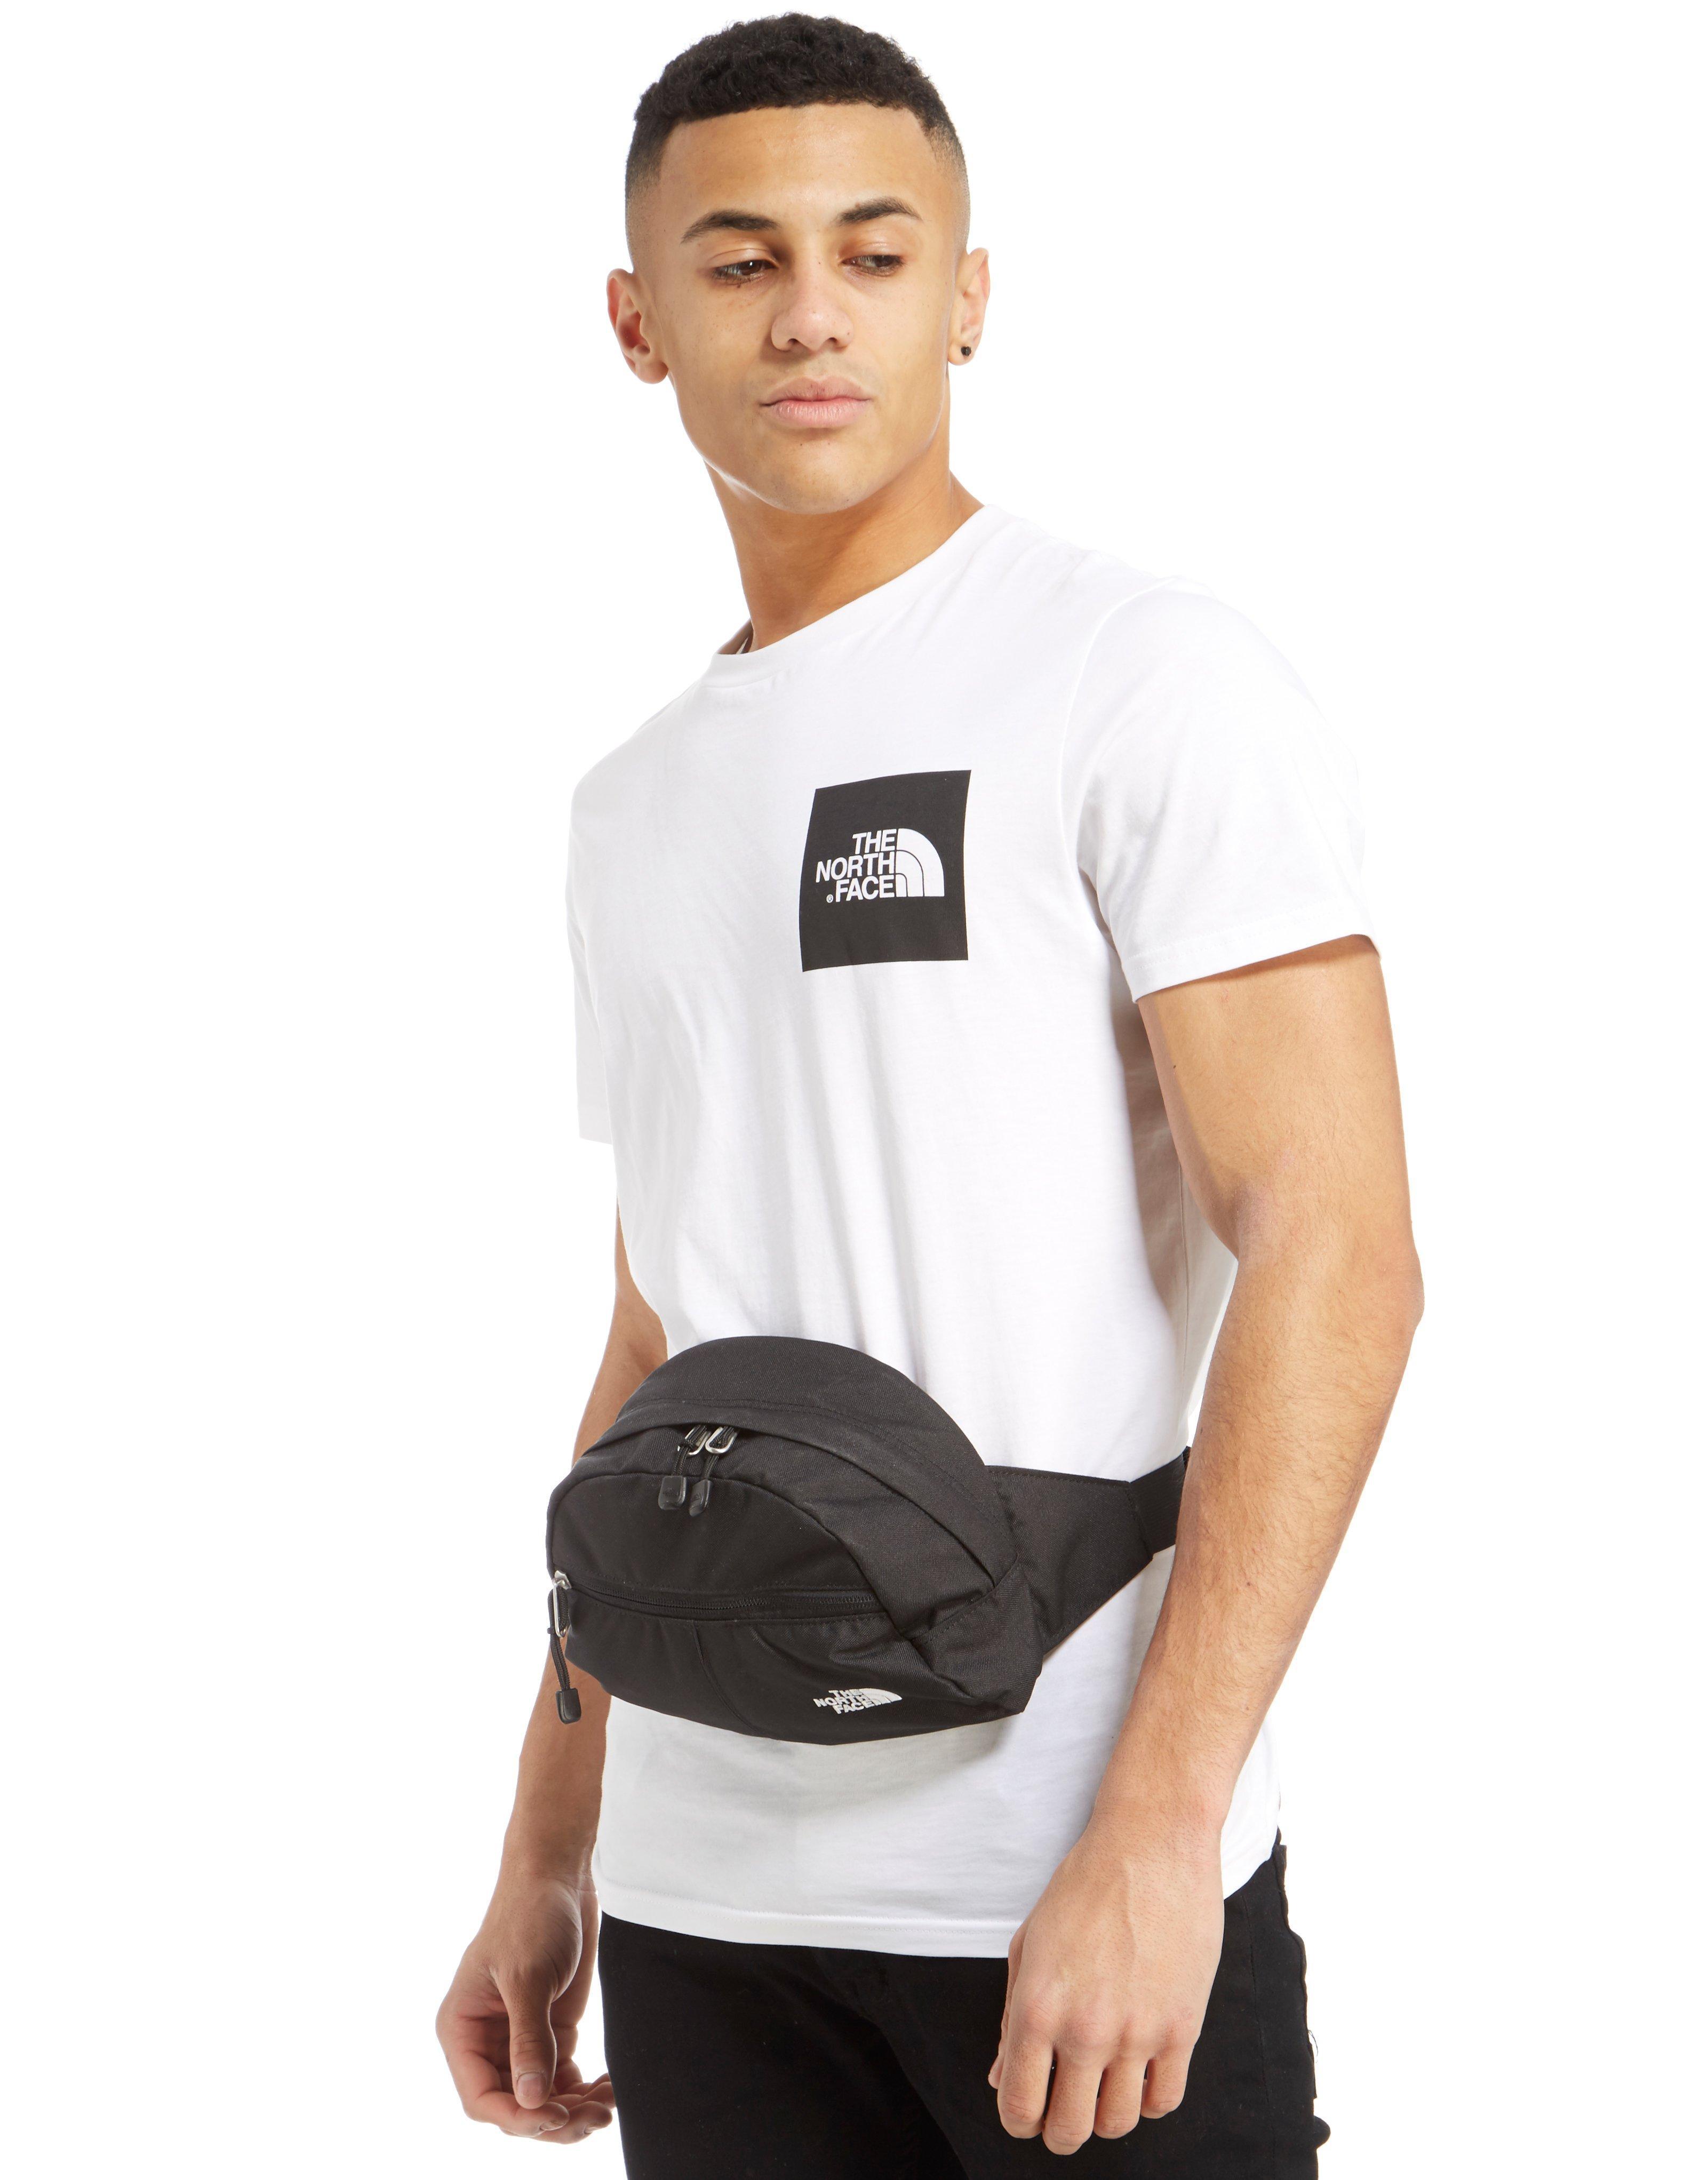 the north face roo lumbar pack